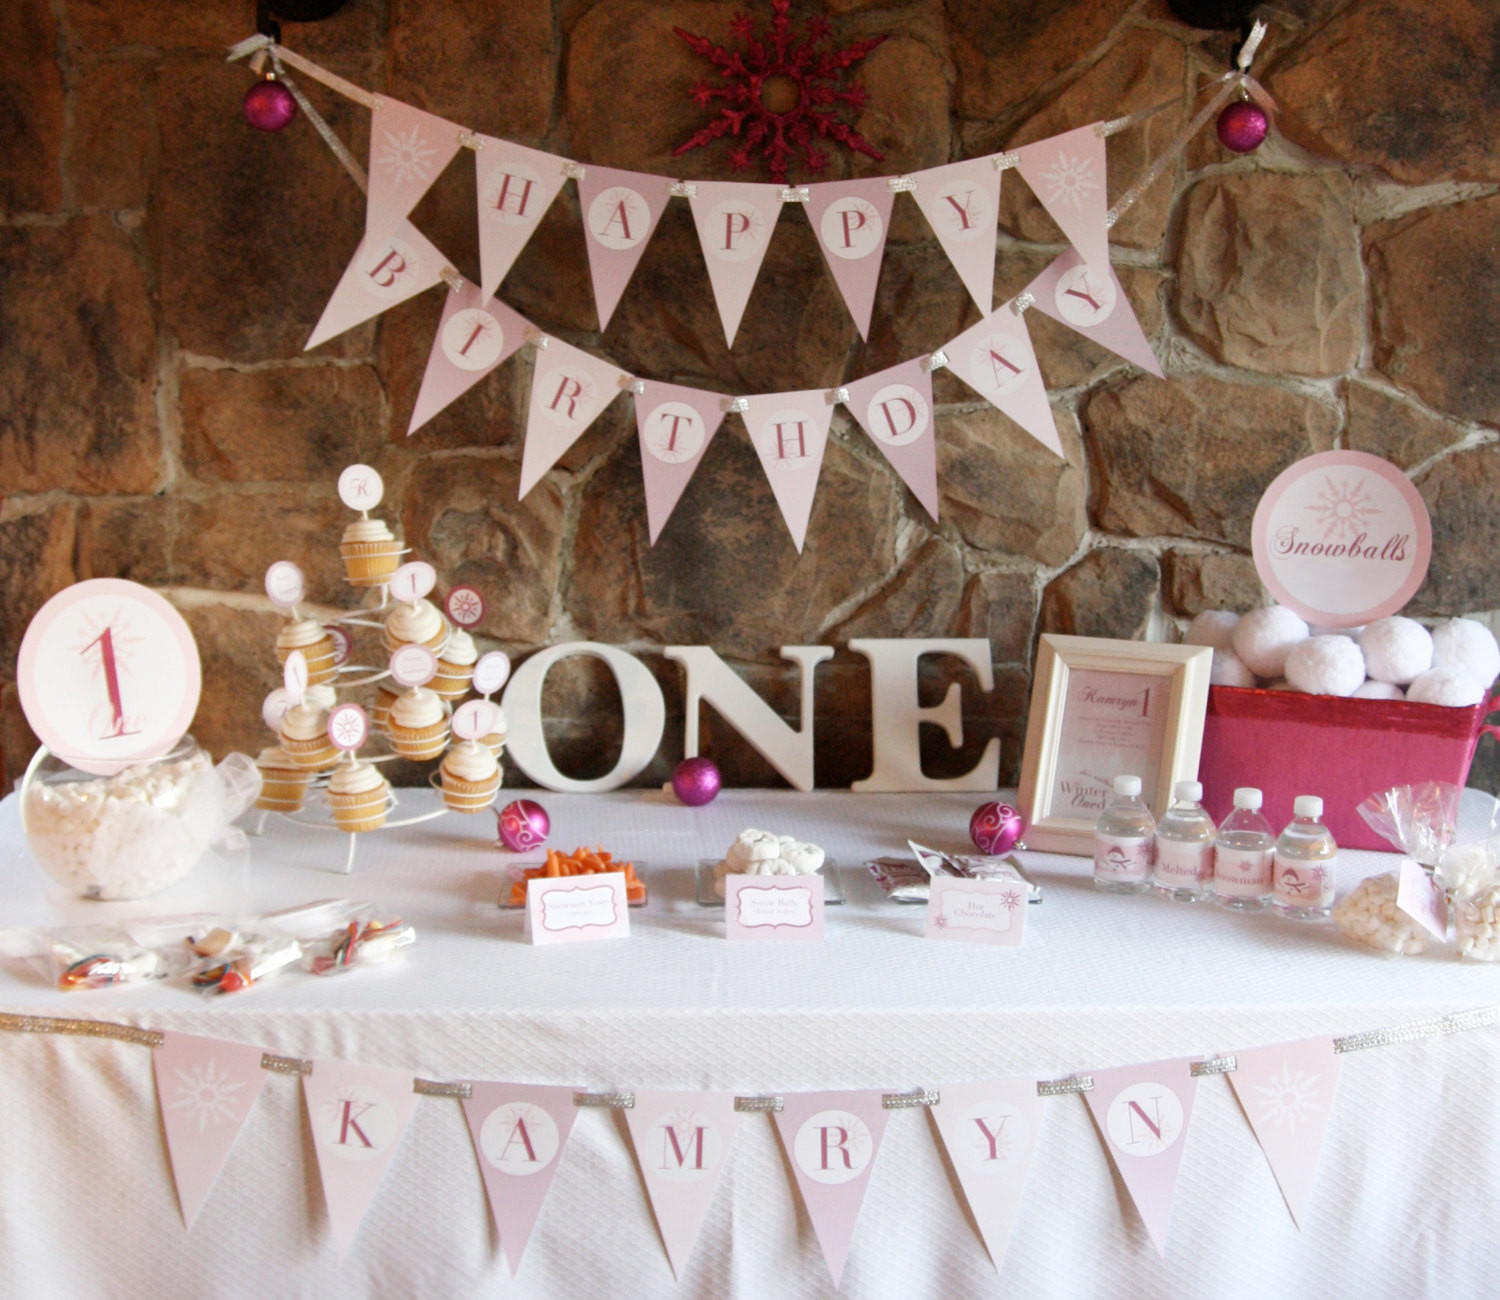 Baby First Birthday Party Supplies
 Winter ONEderland Birthday Party Theme Baby Girl s First